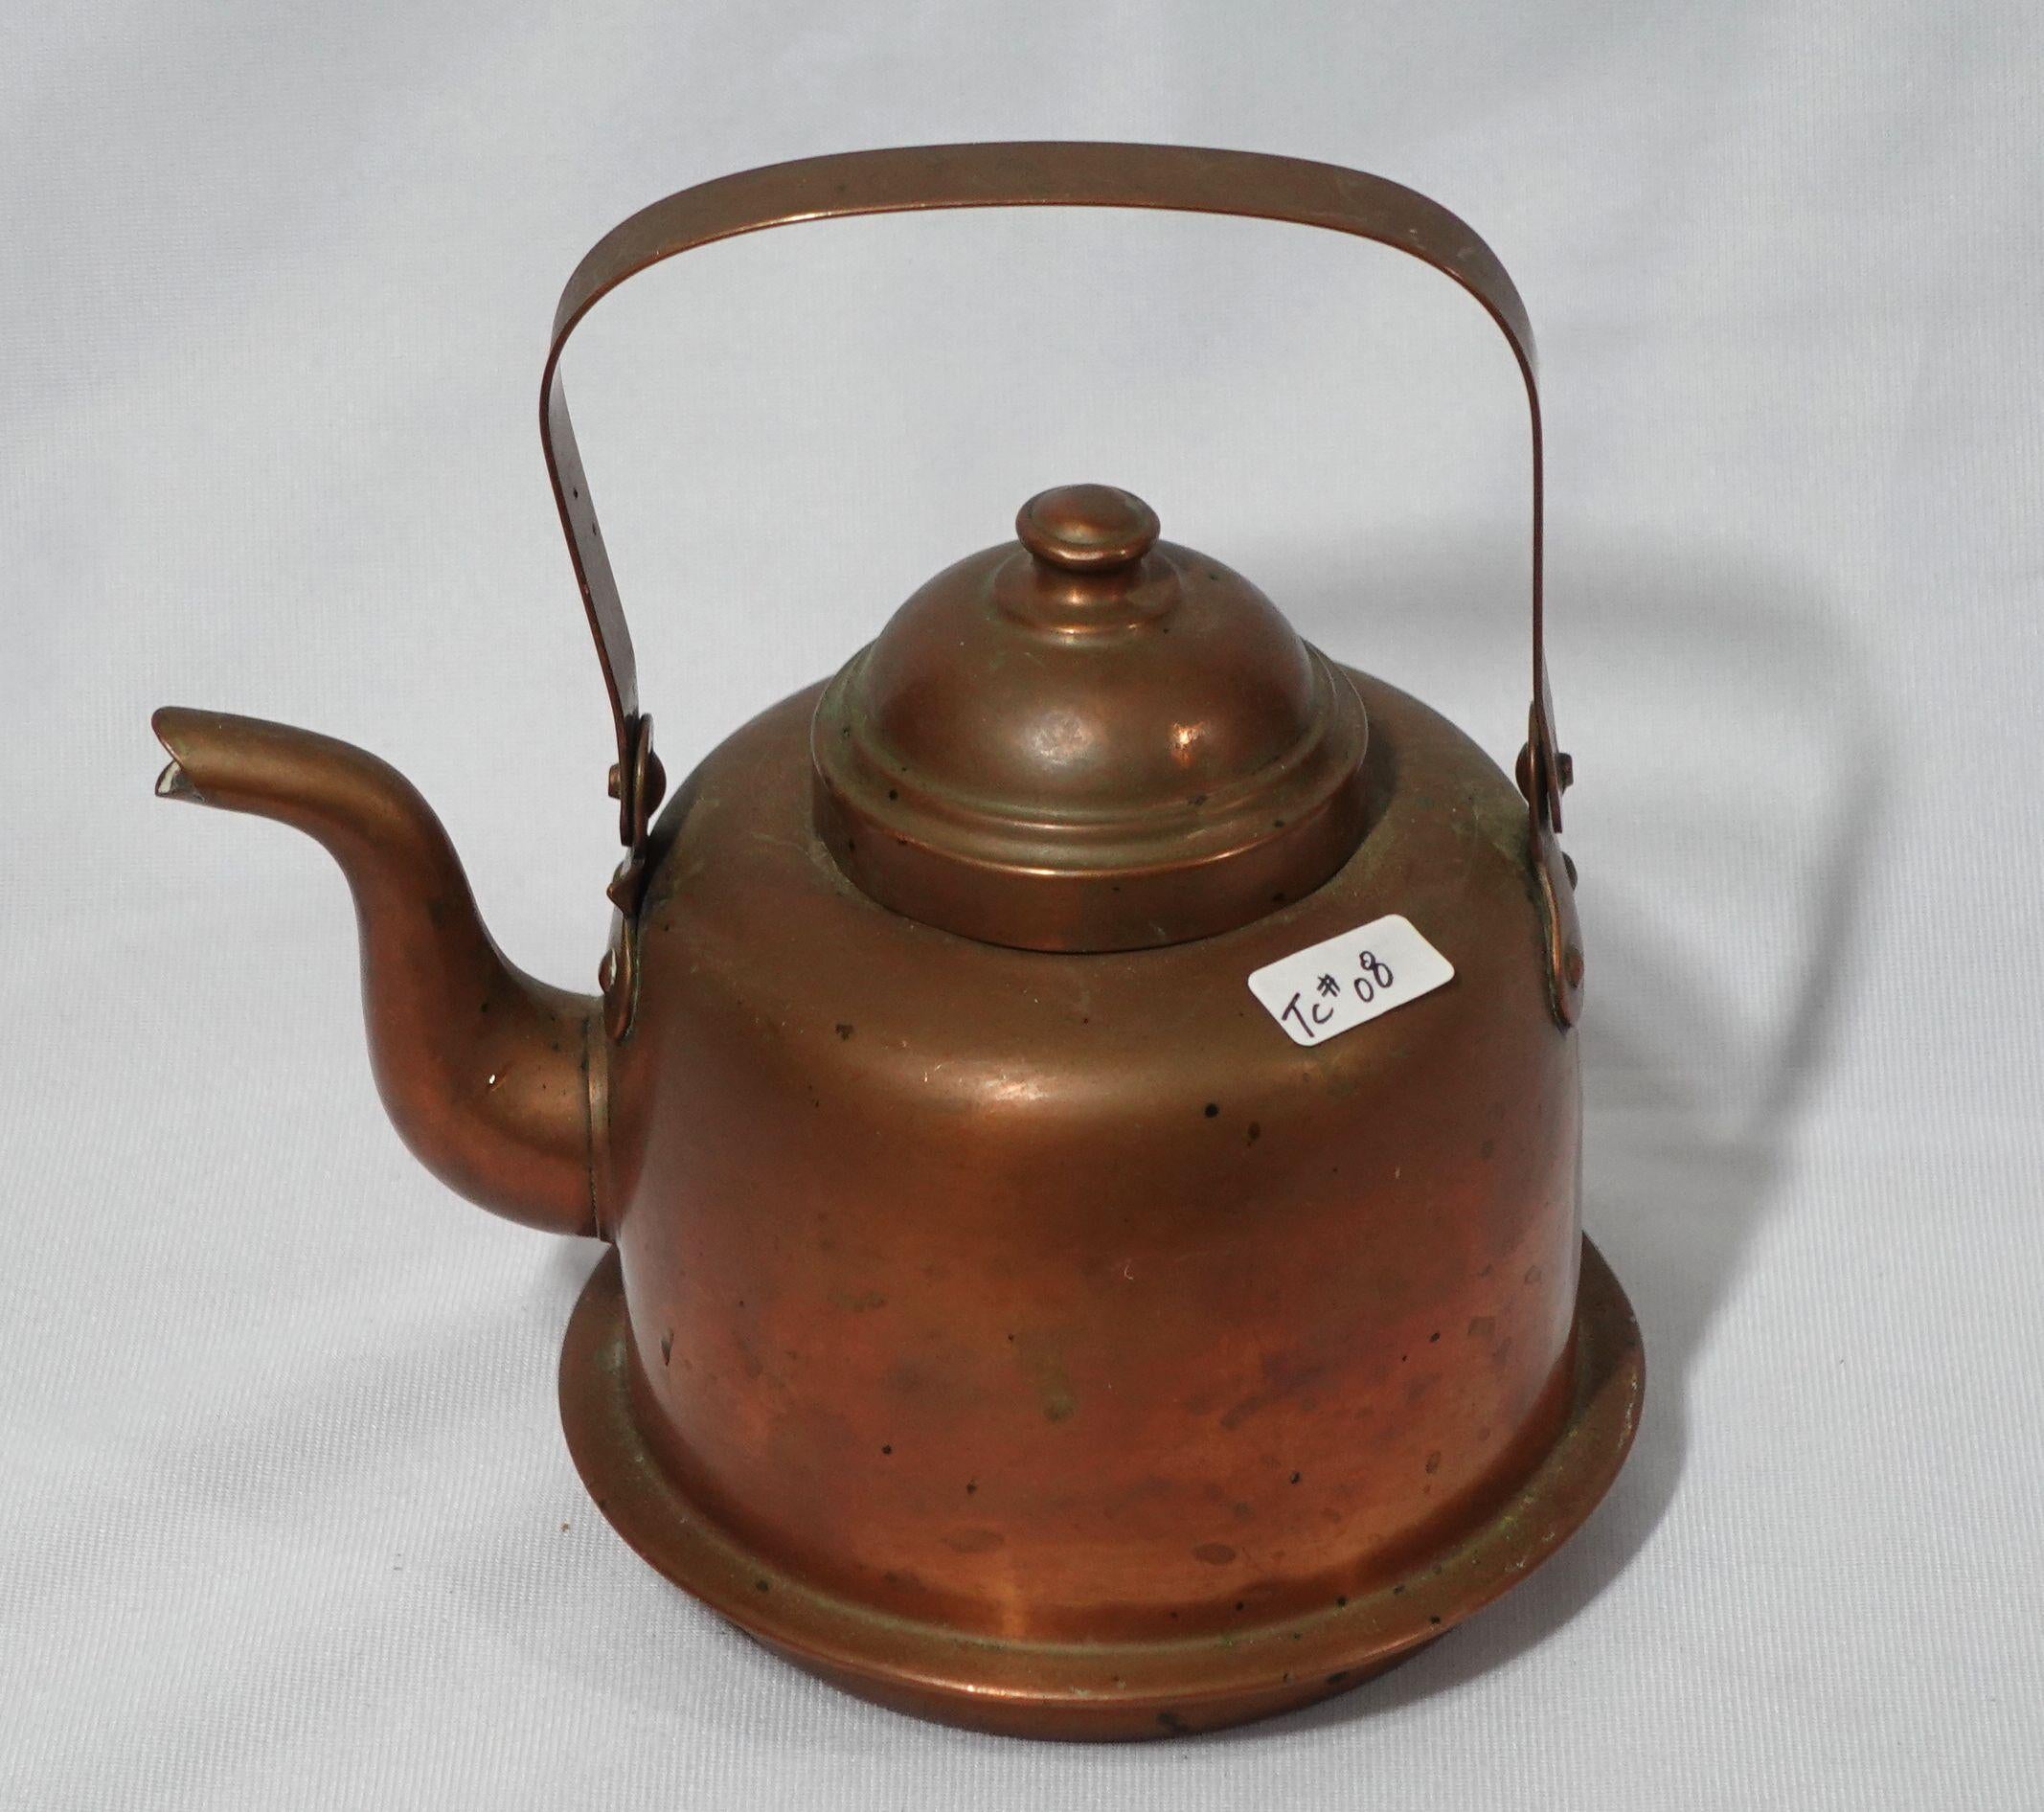 Hand-hammered a copper tea kettle made in England from the 19th century, very well hand-made with delicate craftsmanship, and highly collectible antique.
